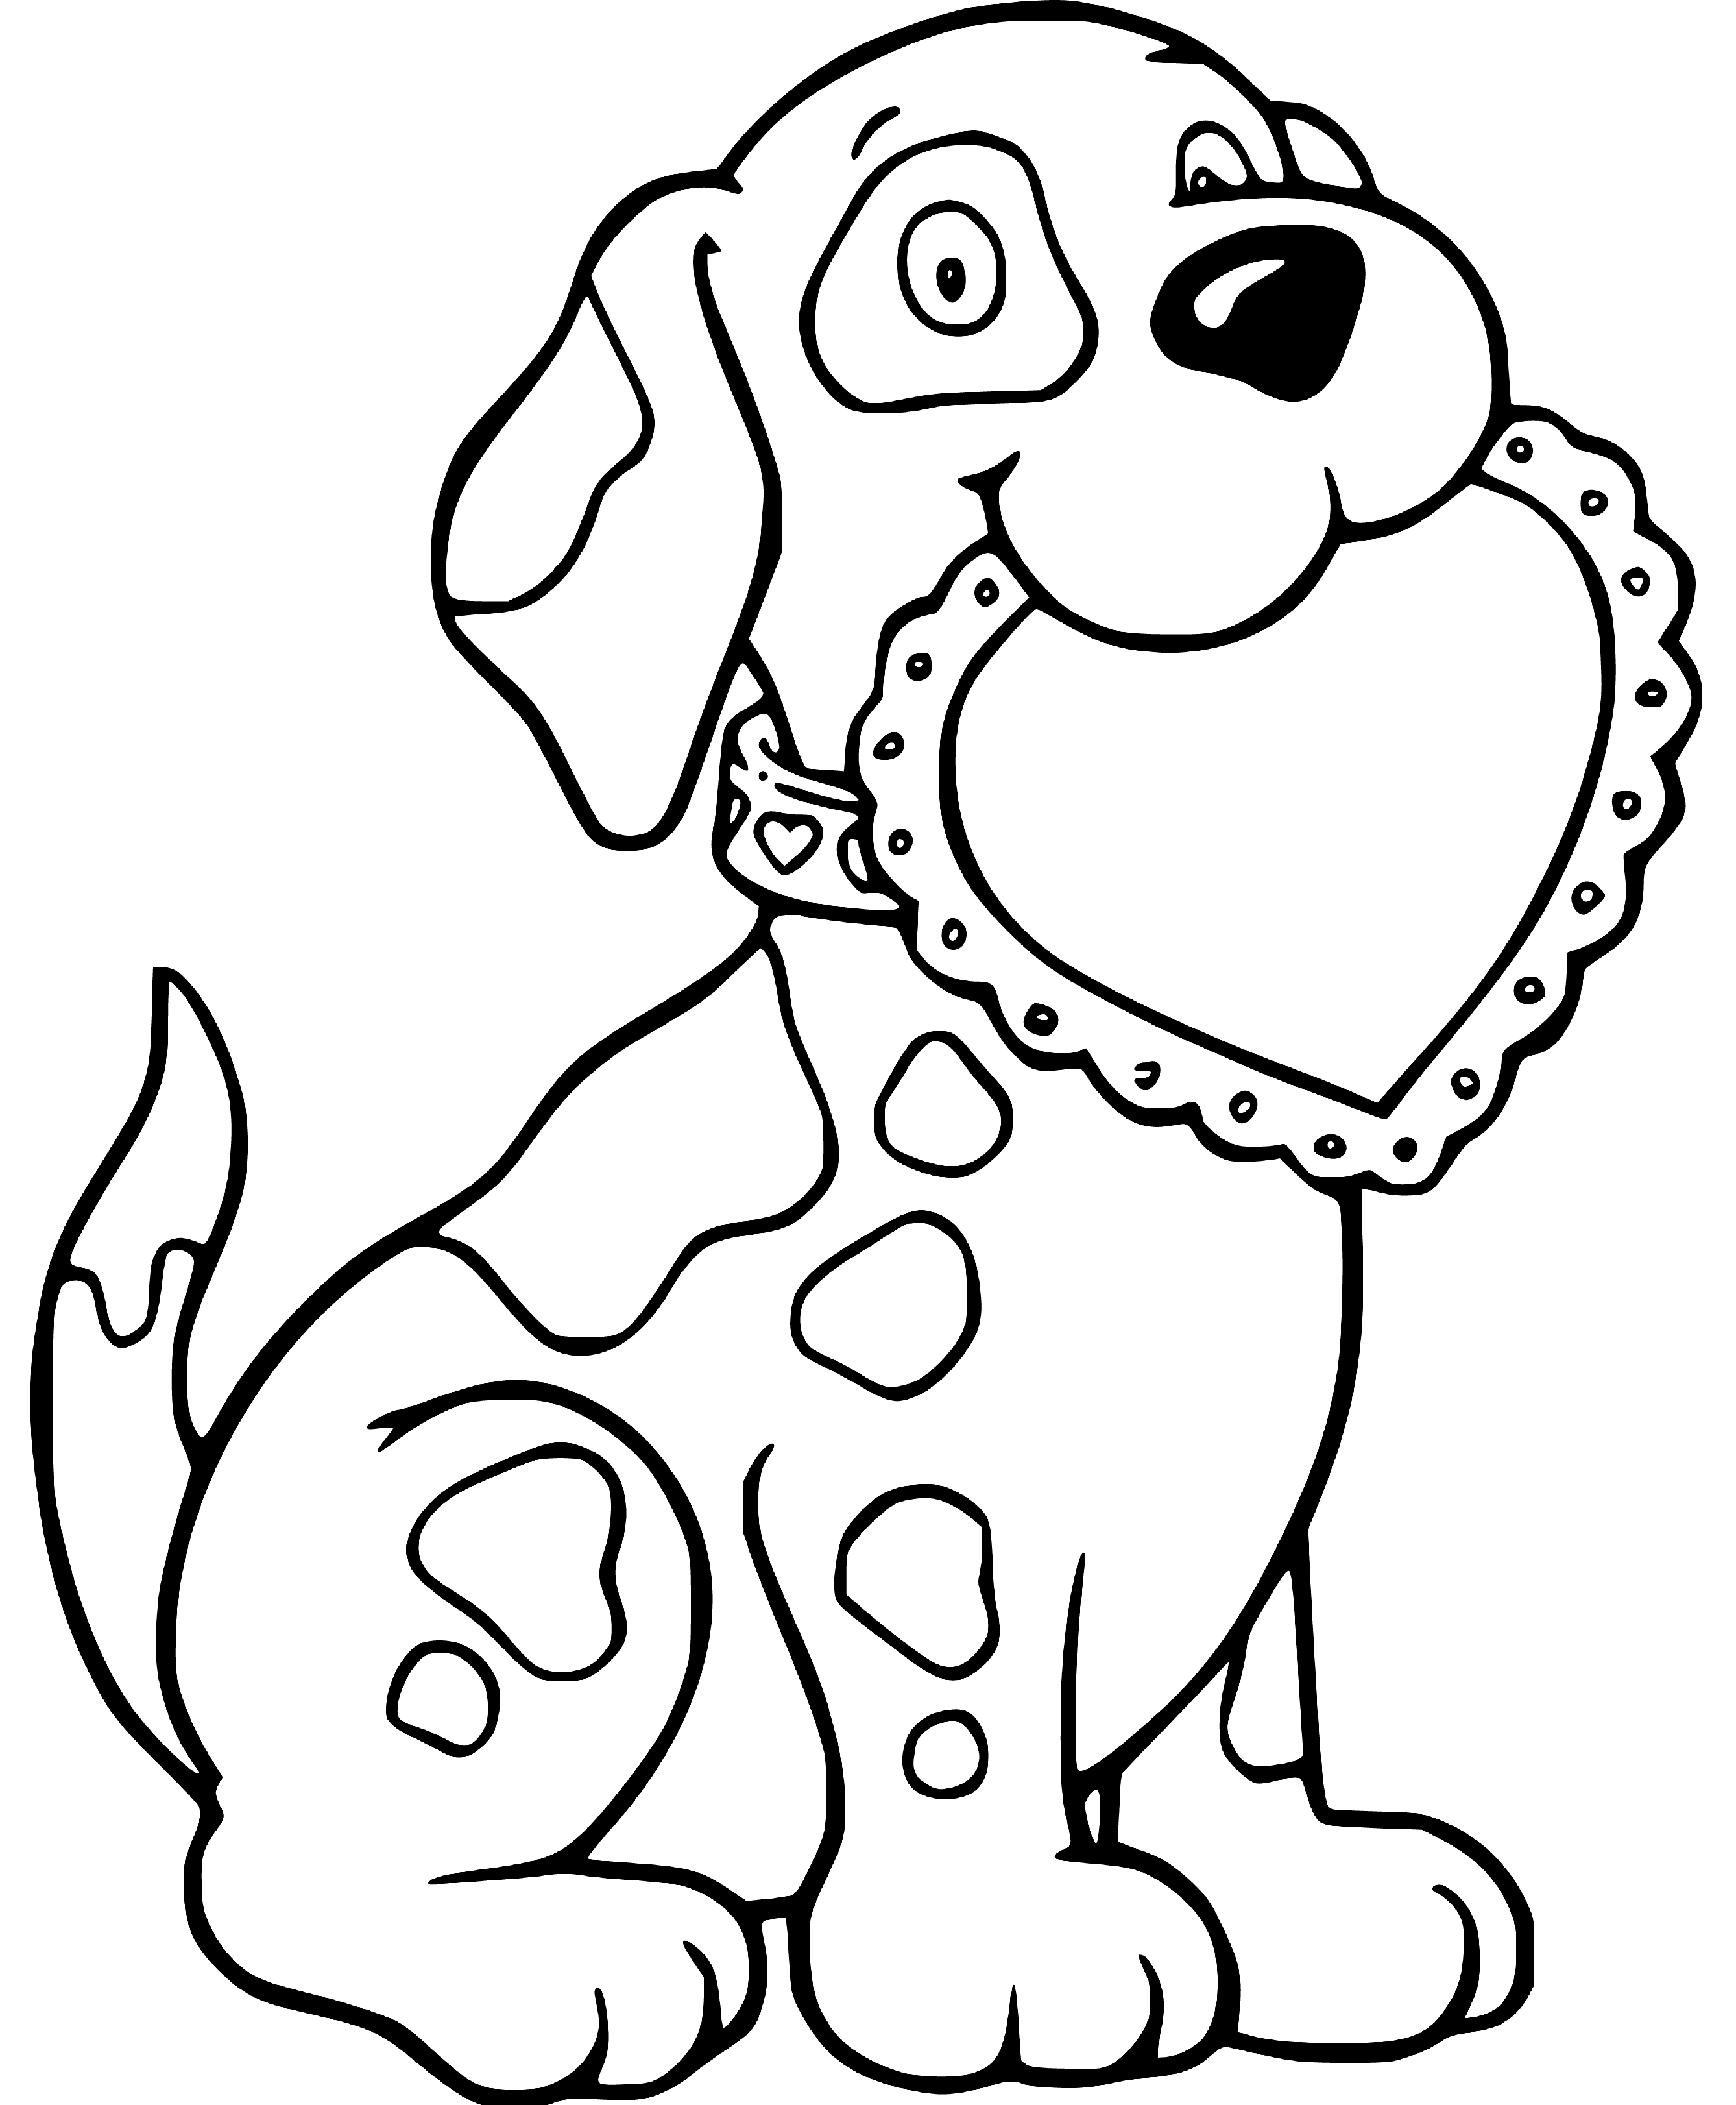 Little Puppy Coloring Page for Kids - SheetalColor.com